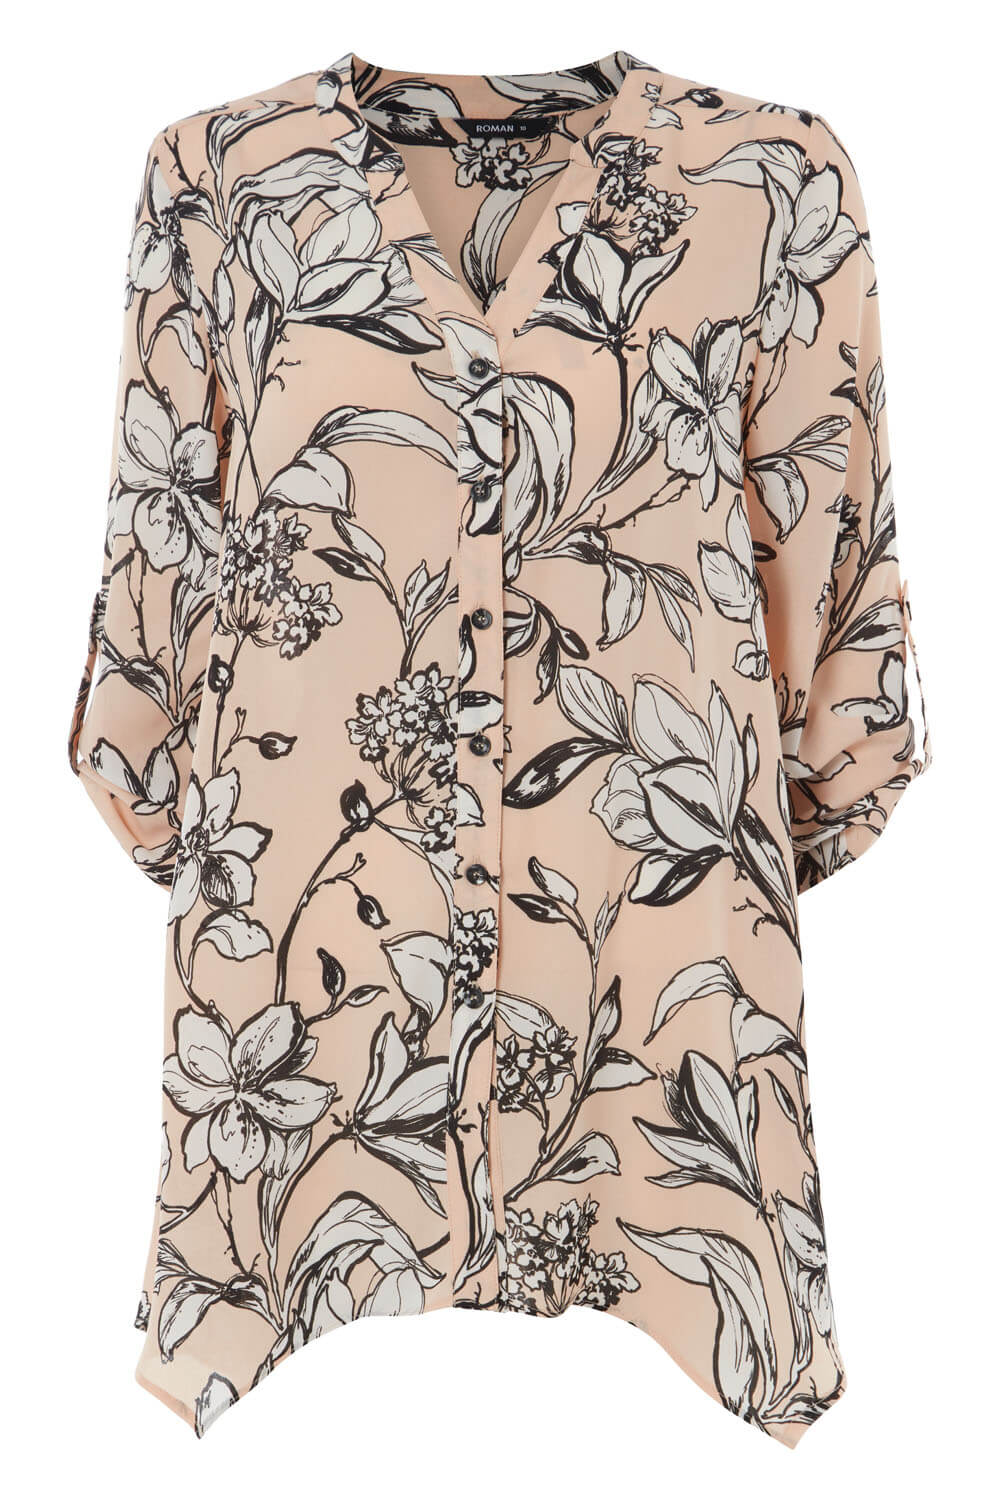 Light Pink Floral Print Button Through Blouse, Image 5 of 5